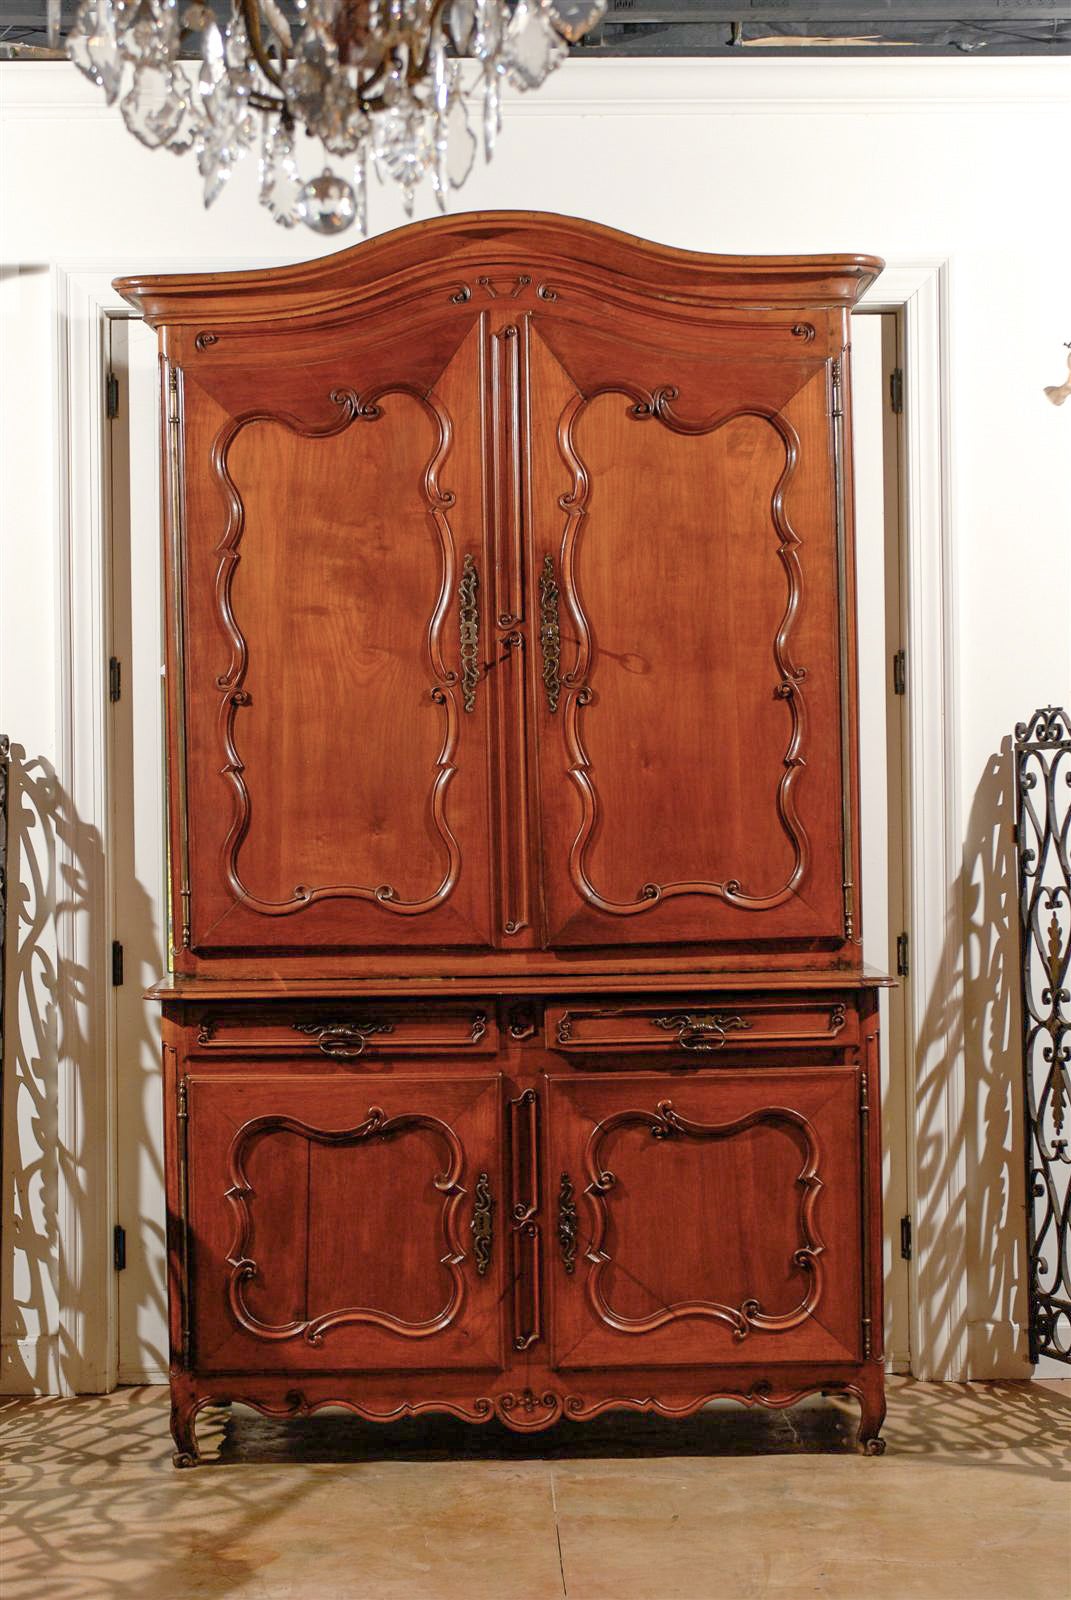 A French Louis XV period cherry buffet à deux-corps from the mid-18th century with original hardware. This French cabinet features a bonnet top surmounting two doors with carved panels and delicate c-scrolls. These small scrolled motifs are repeated